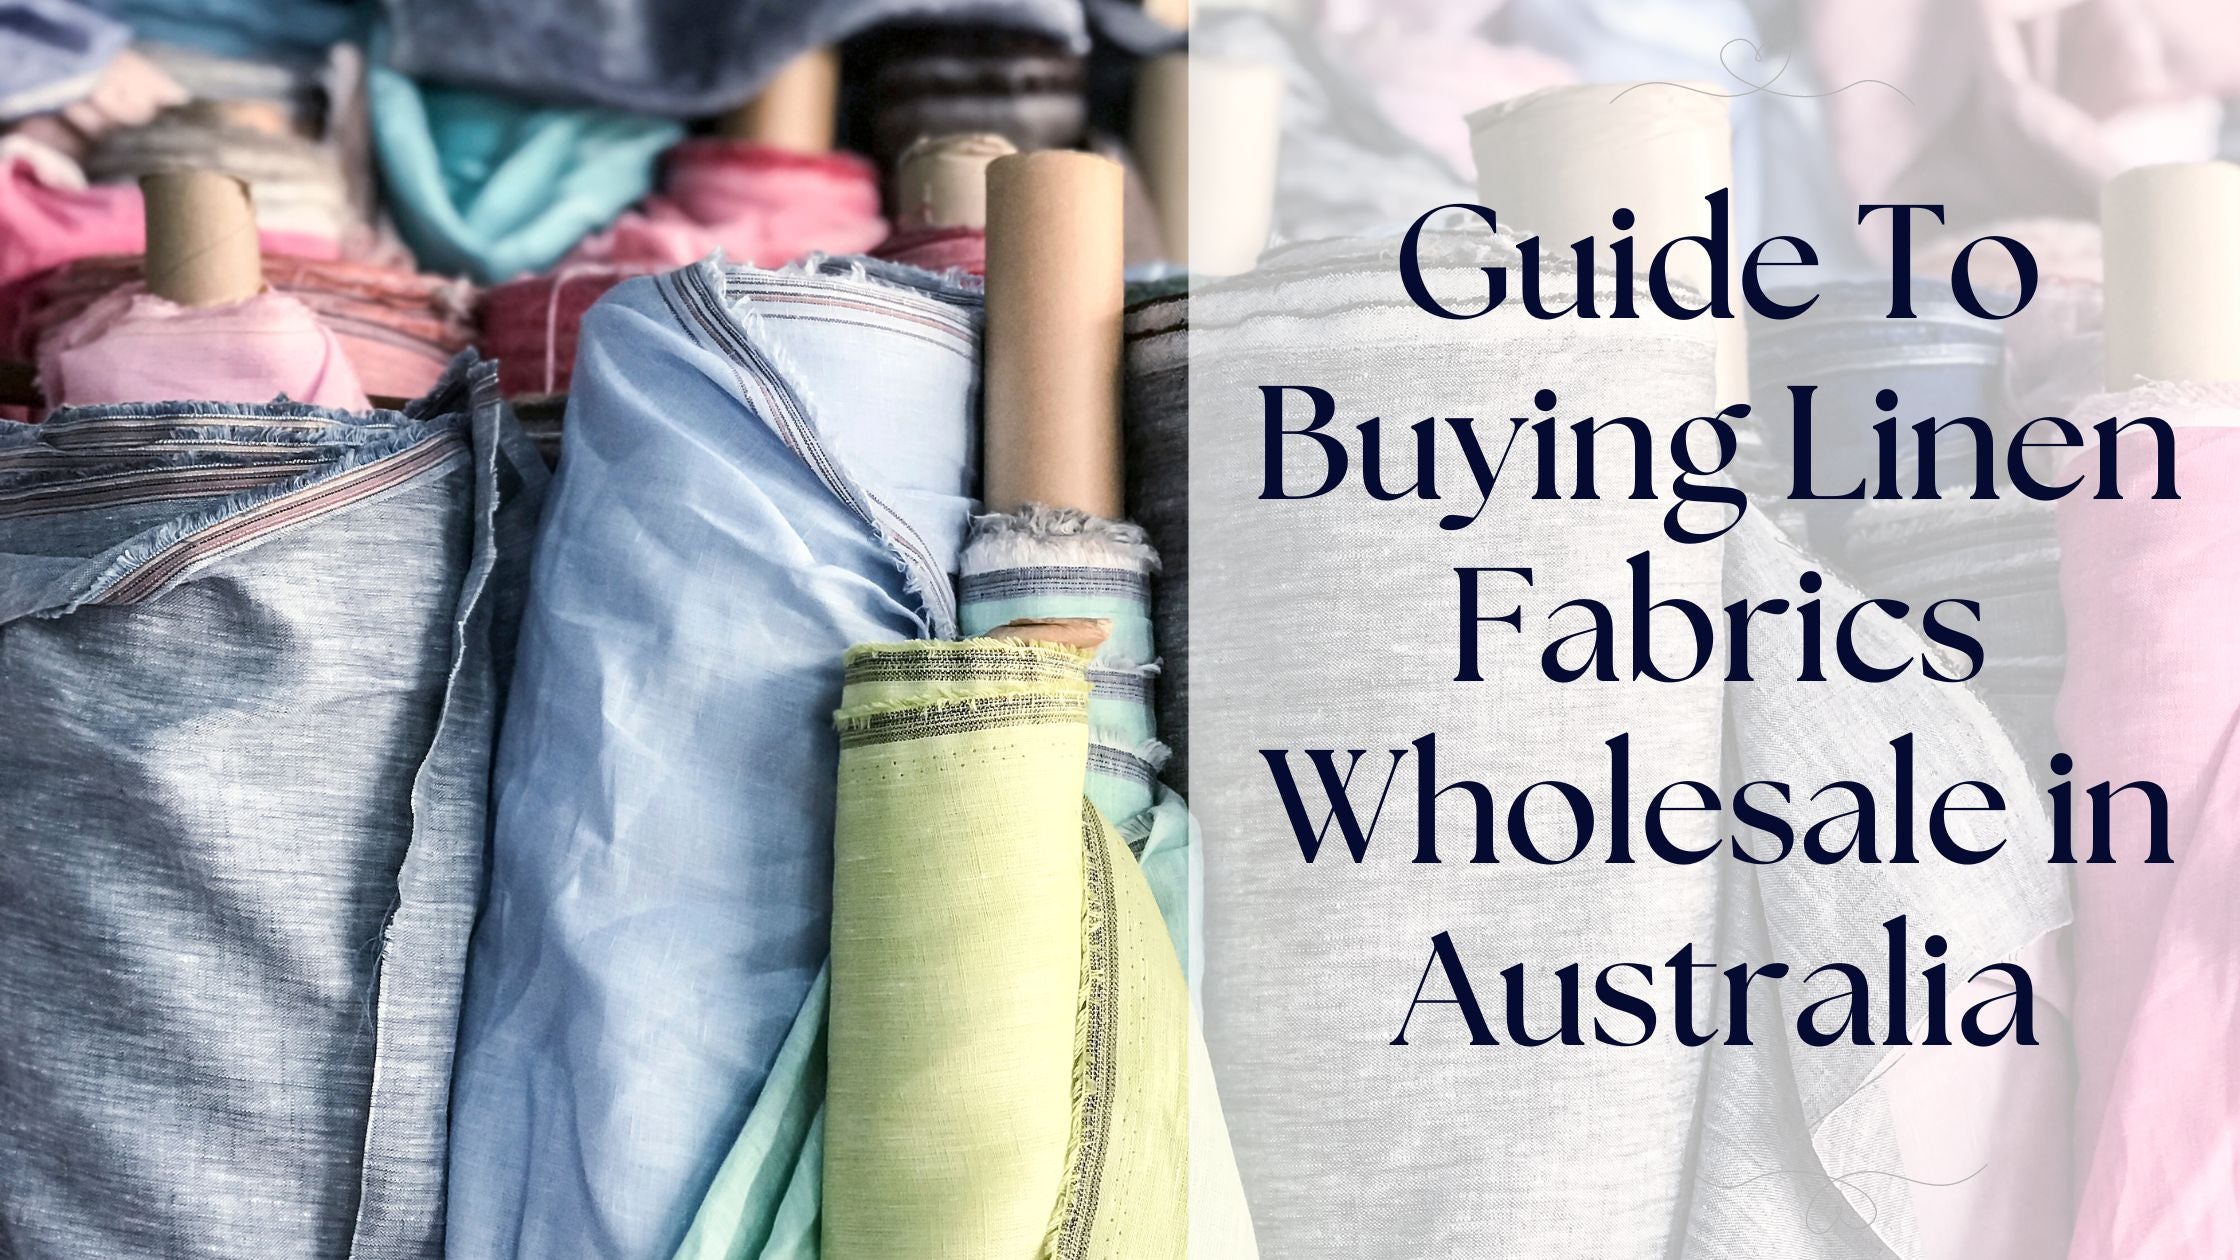 Guide To Buying Linen Fabrics Wholesale in Australia